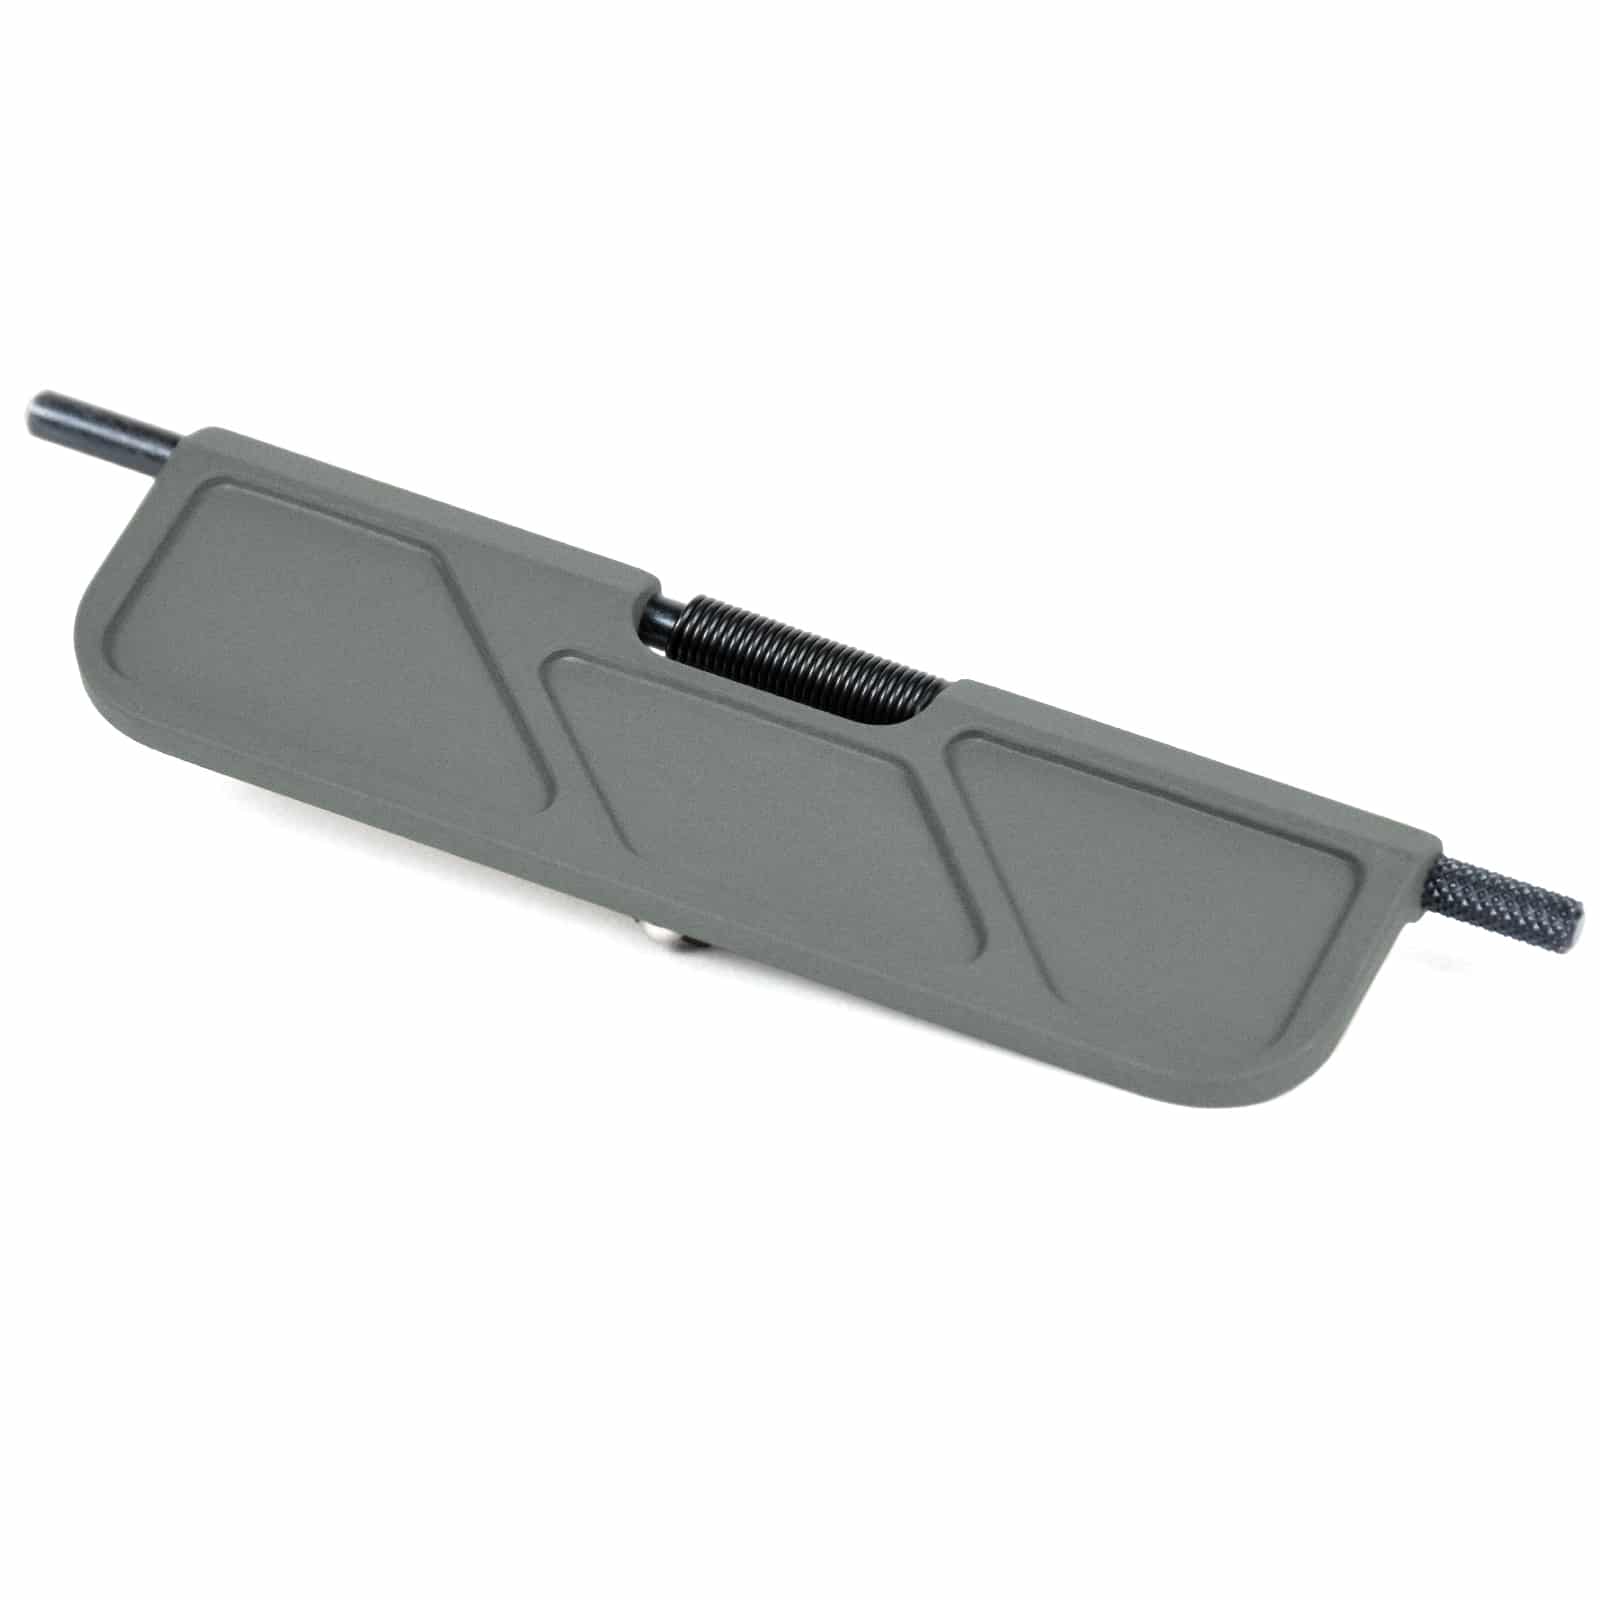 Timber Creek Outdoors Billet Dust Cover - AR BCD